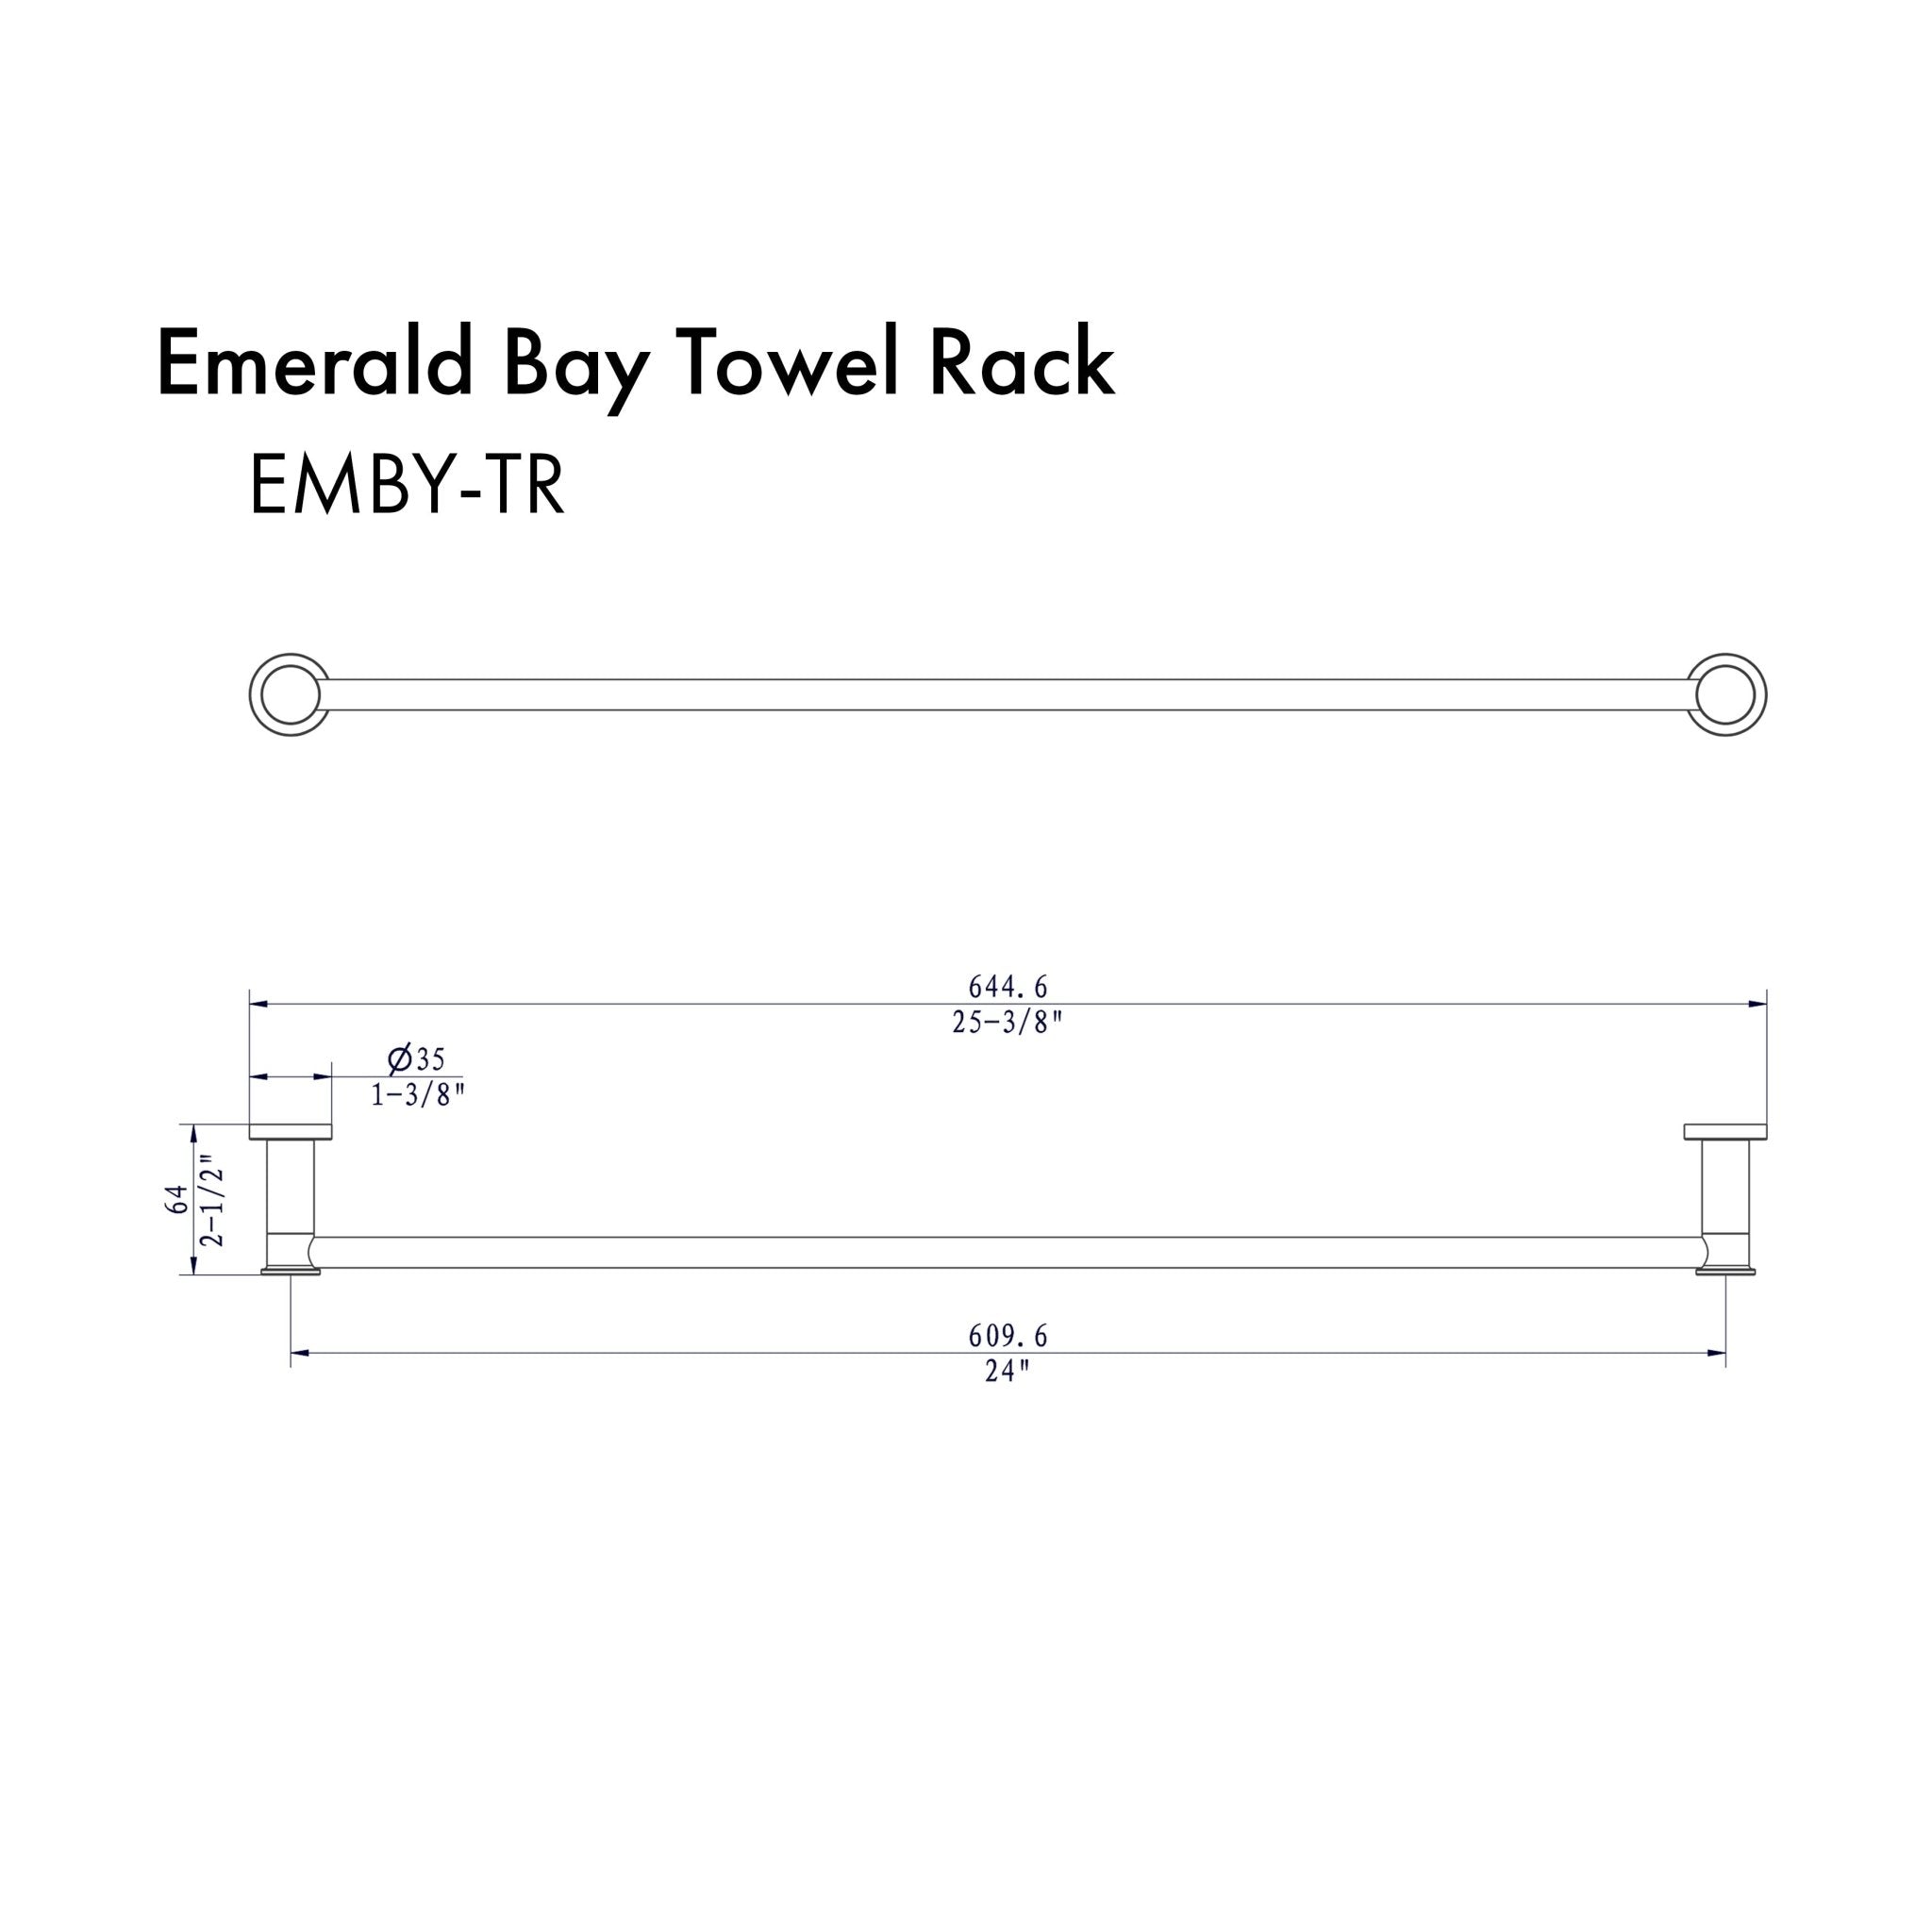 ZLINE Emerald Bay Towel Rail with color options (EMBY-TR) dimensional diagram